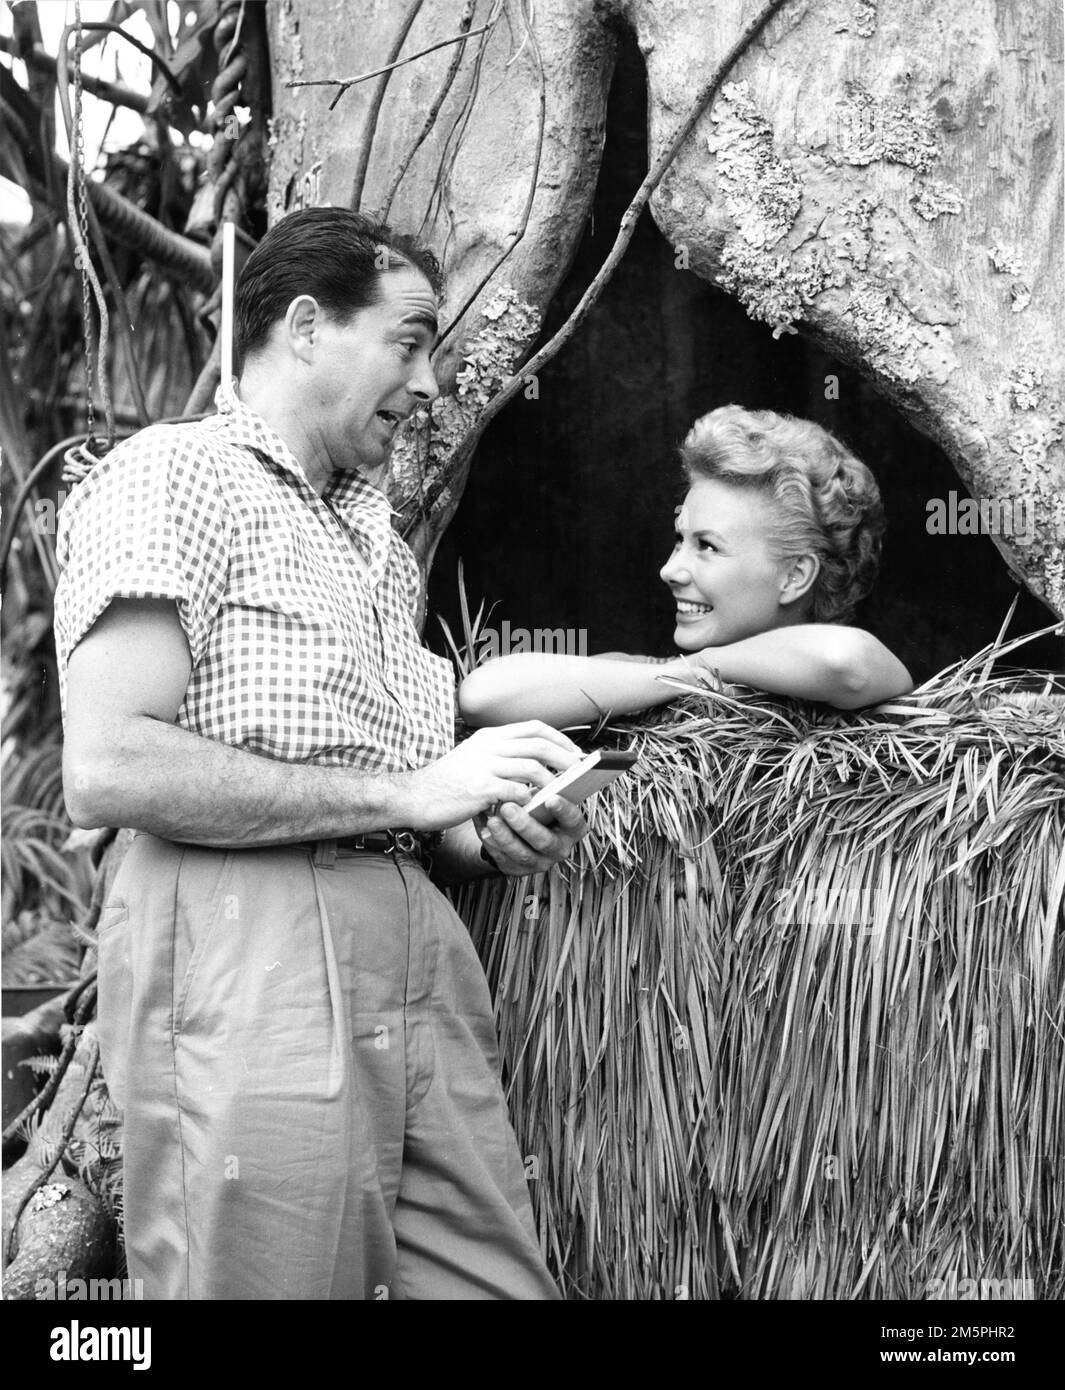 MITZI GAYNOR on set candid with Variety columnist ARMAND ''ARMY'' ARCHERD during filming of RODGERS and HAMMERSTEIN's SOUTH PACIFIC 1958 director JOSHUA LOGAN music Richard Rodgers lyrics Oscar Hammerstein II based on Tales of the South Pacific by James A. Michener Rodgers and Hammerstein Productions / Magna Theatre Corporation / Twentieth Century Fox Stock Photo